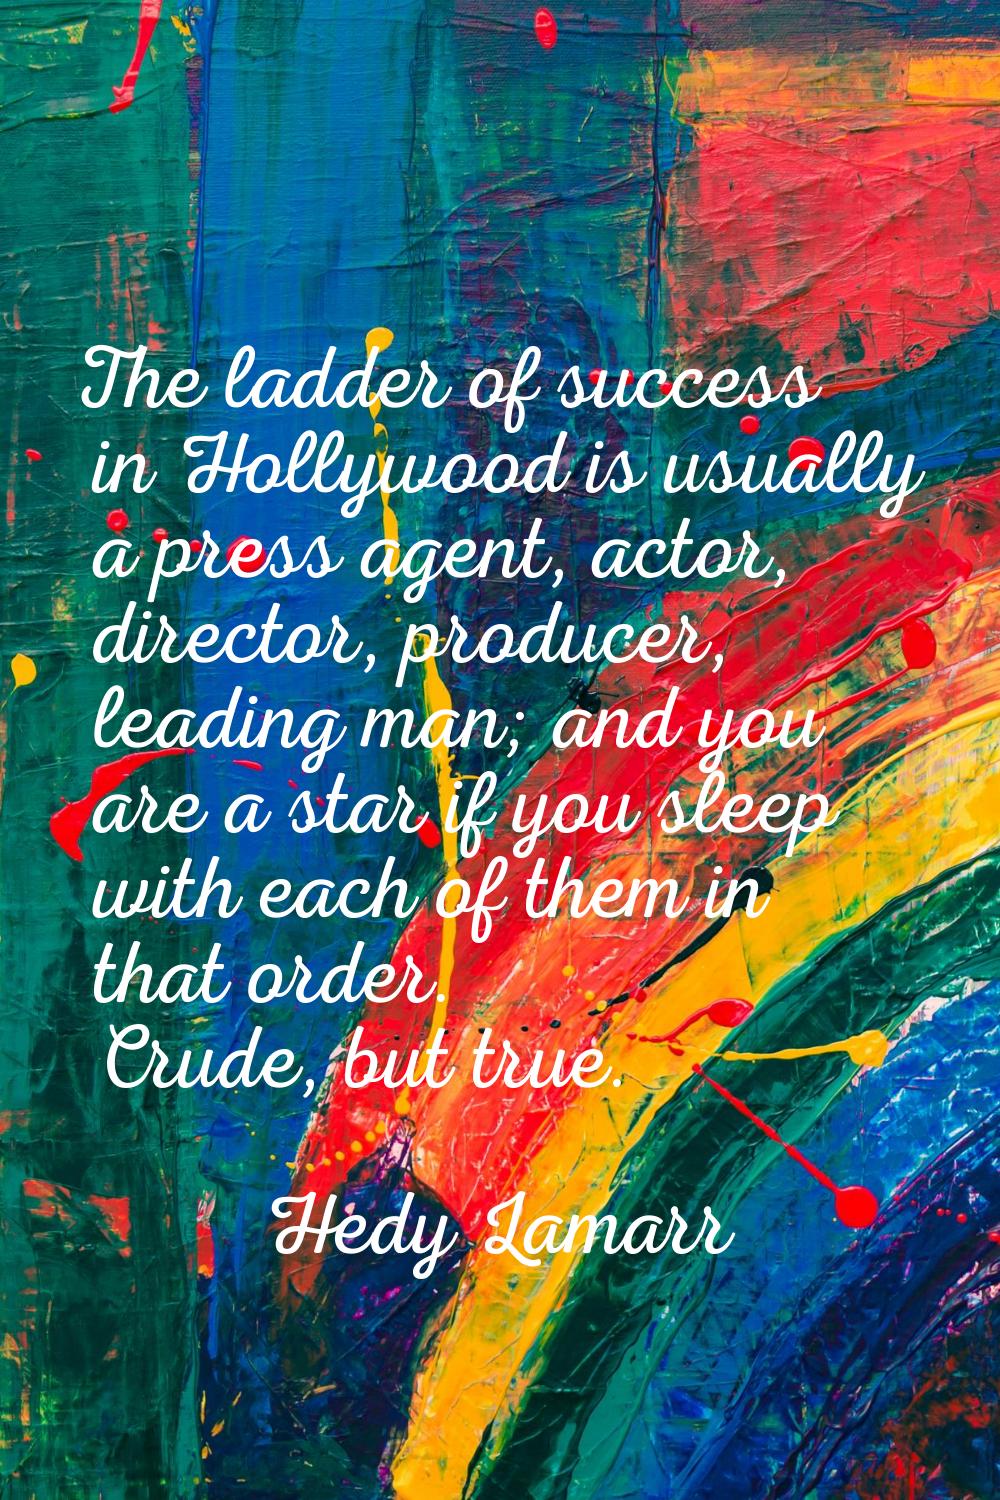 The ladder of success in Hollywood is usually a press agent, actor, director, producer, leading man